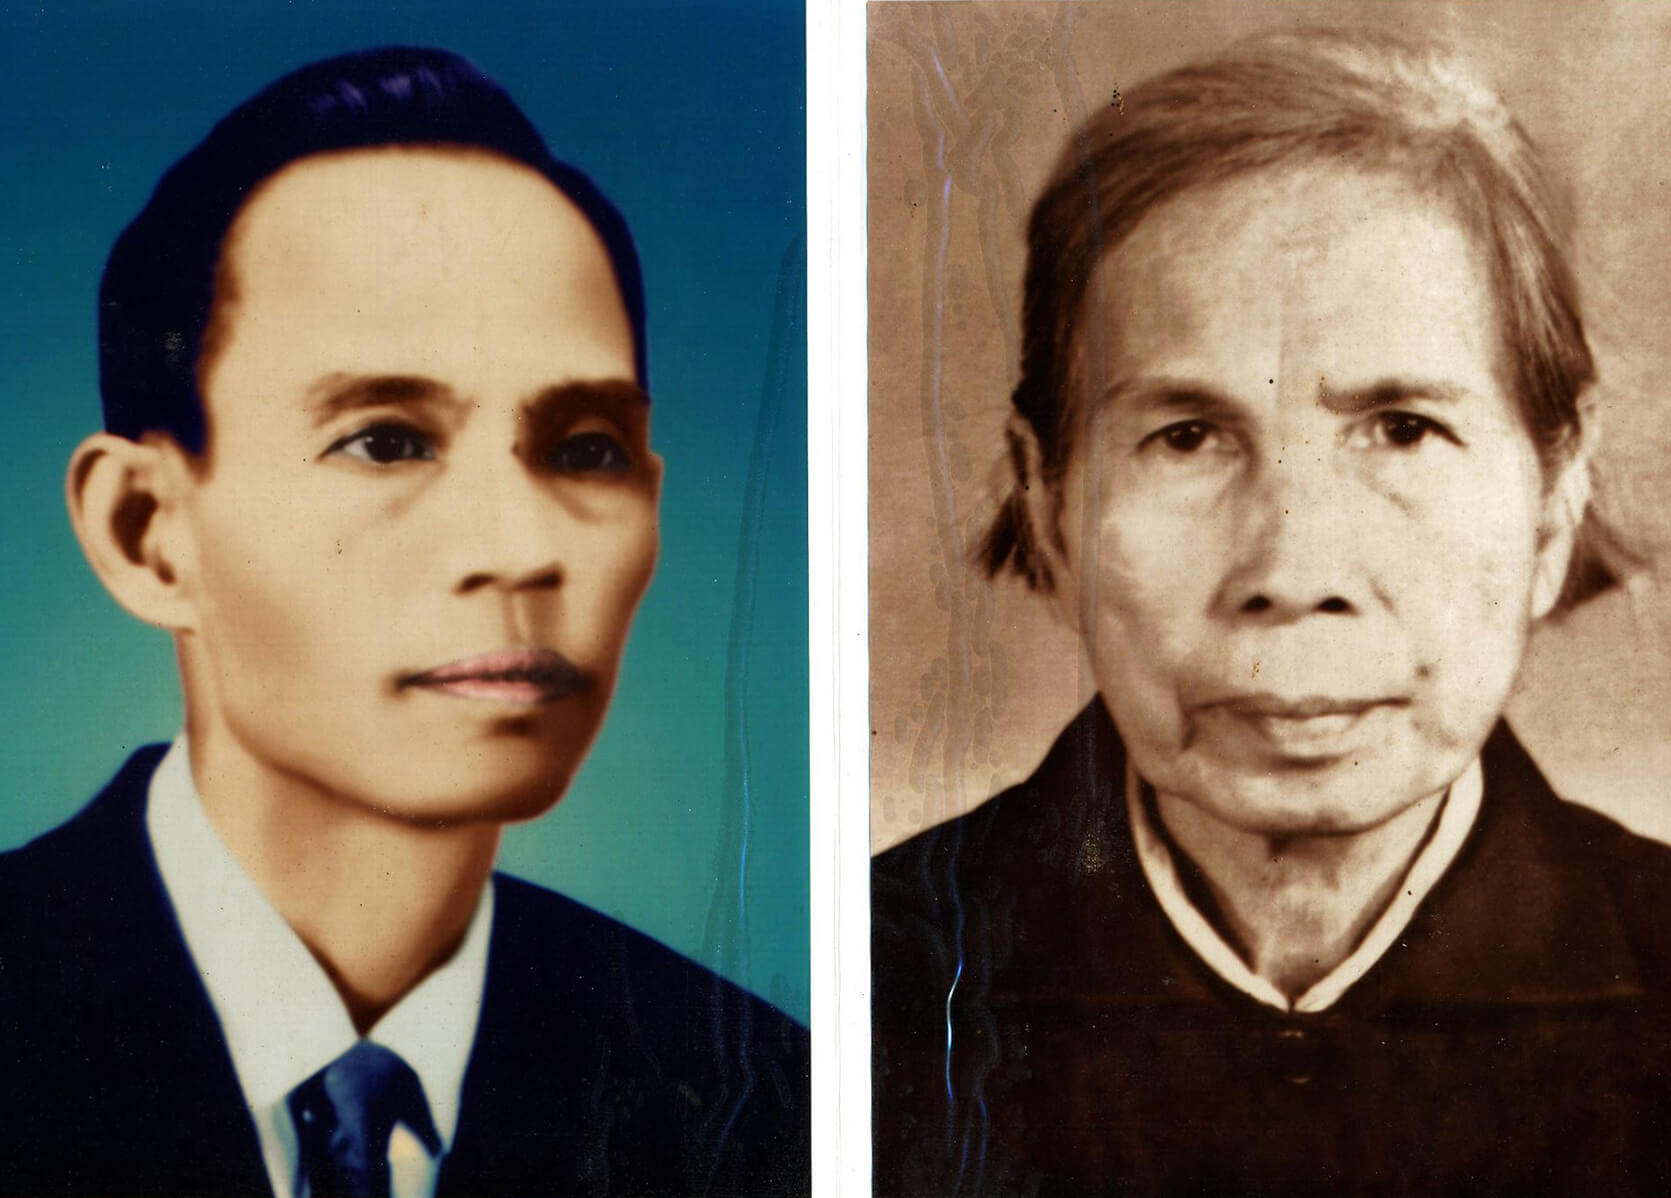 Portraits of a Vietnamese man and woman.